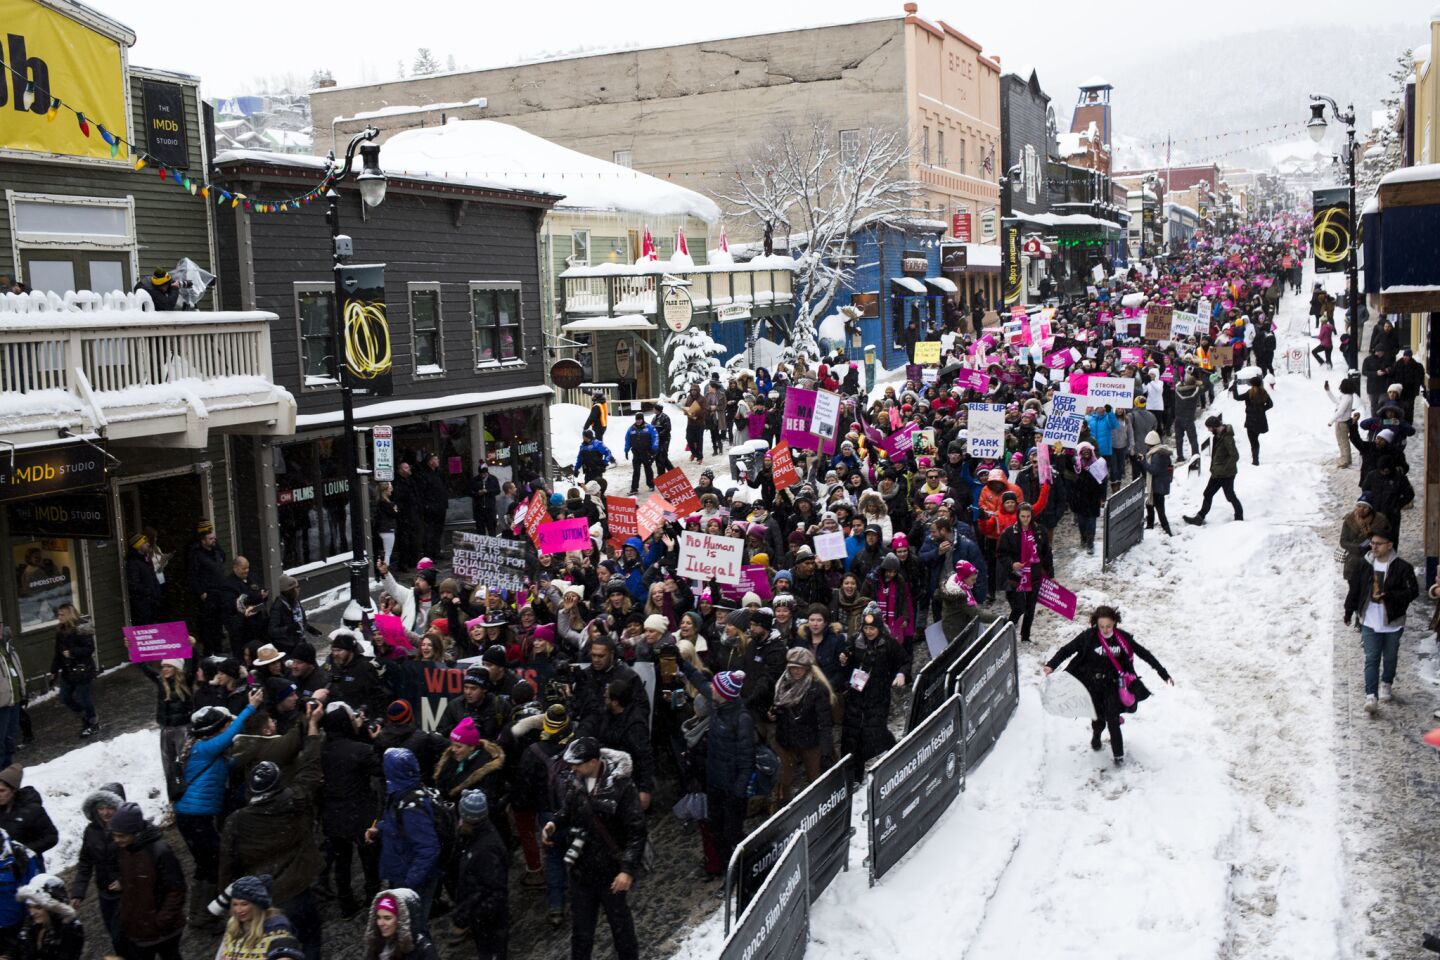 People march down Main St. during a march for women's rights at the Sundance film festival.